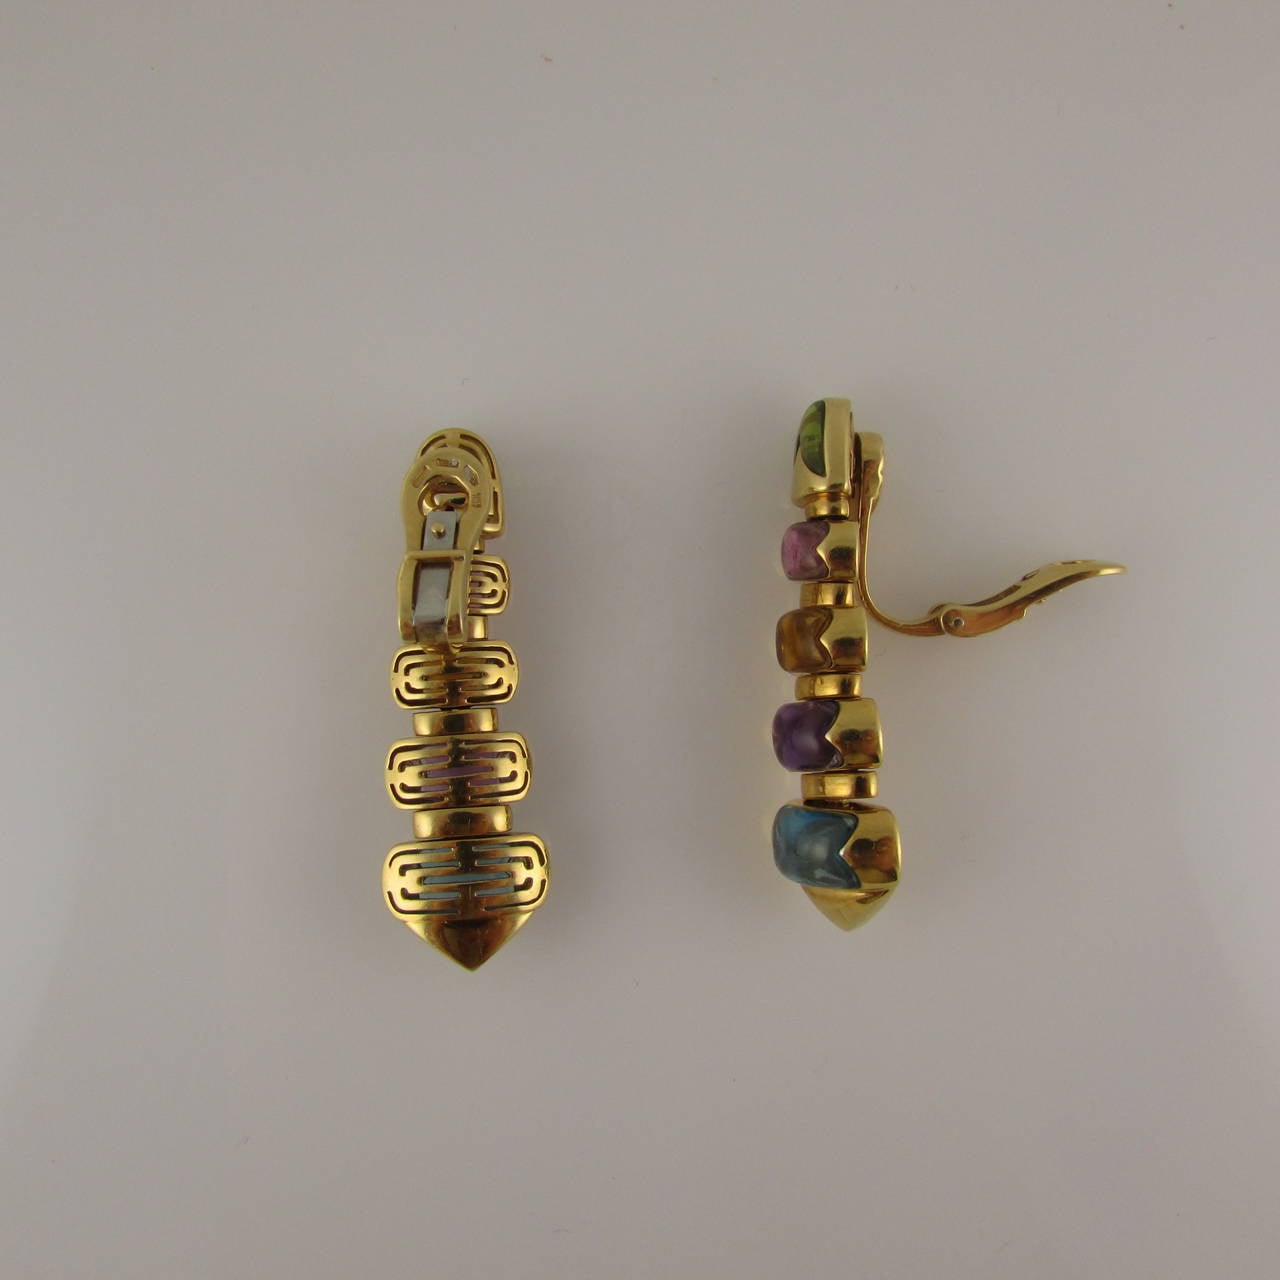 Pair of 18KT yellow gold and cabochon semi-precious “Celtica” drop earrings by Bvlgari. Clip backs, no posts. c1990s. Bulgari no longer makes these earrings.